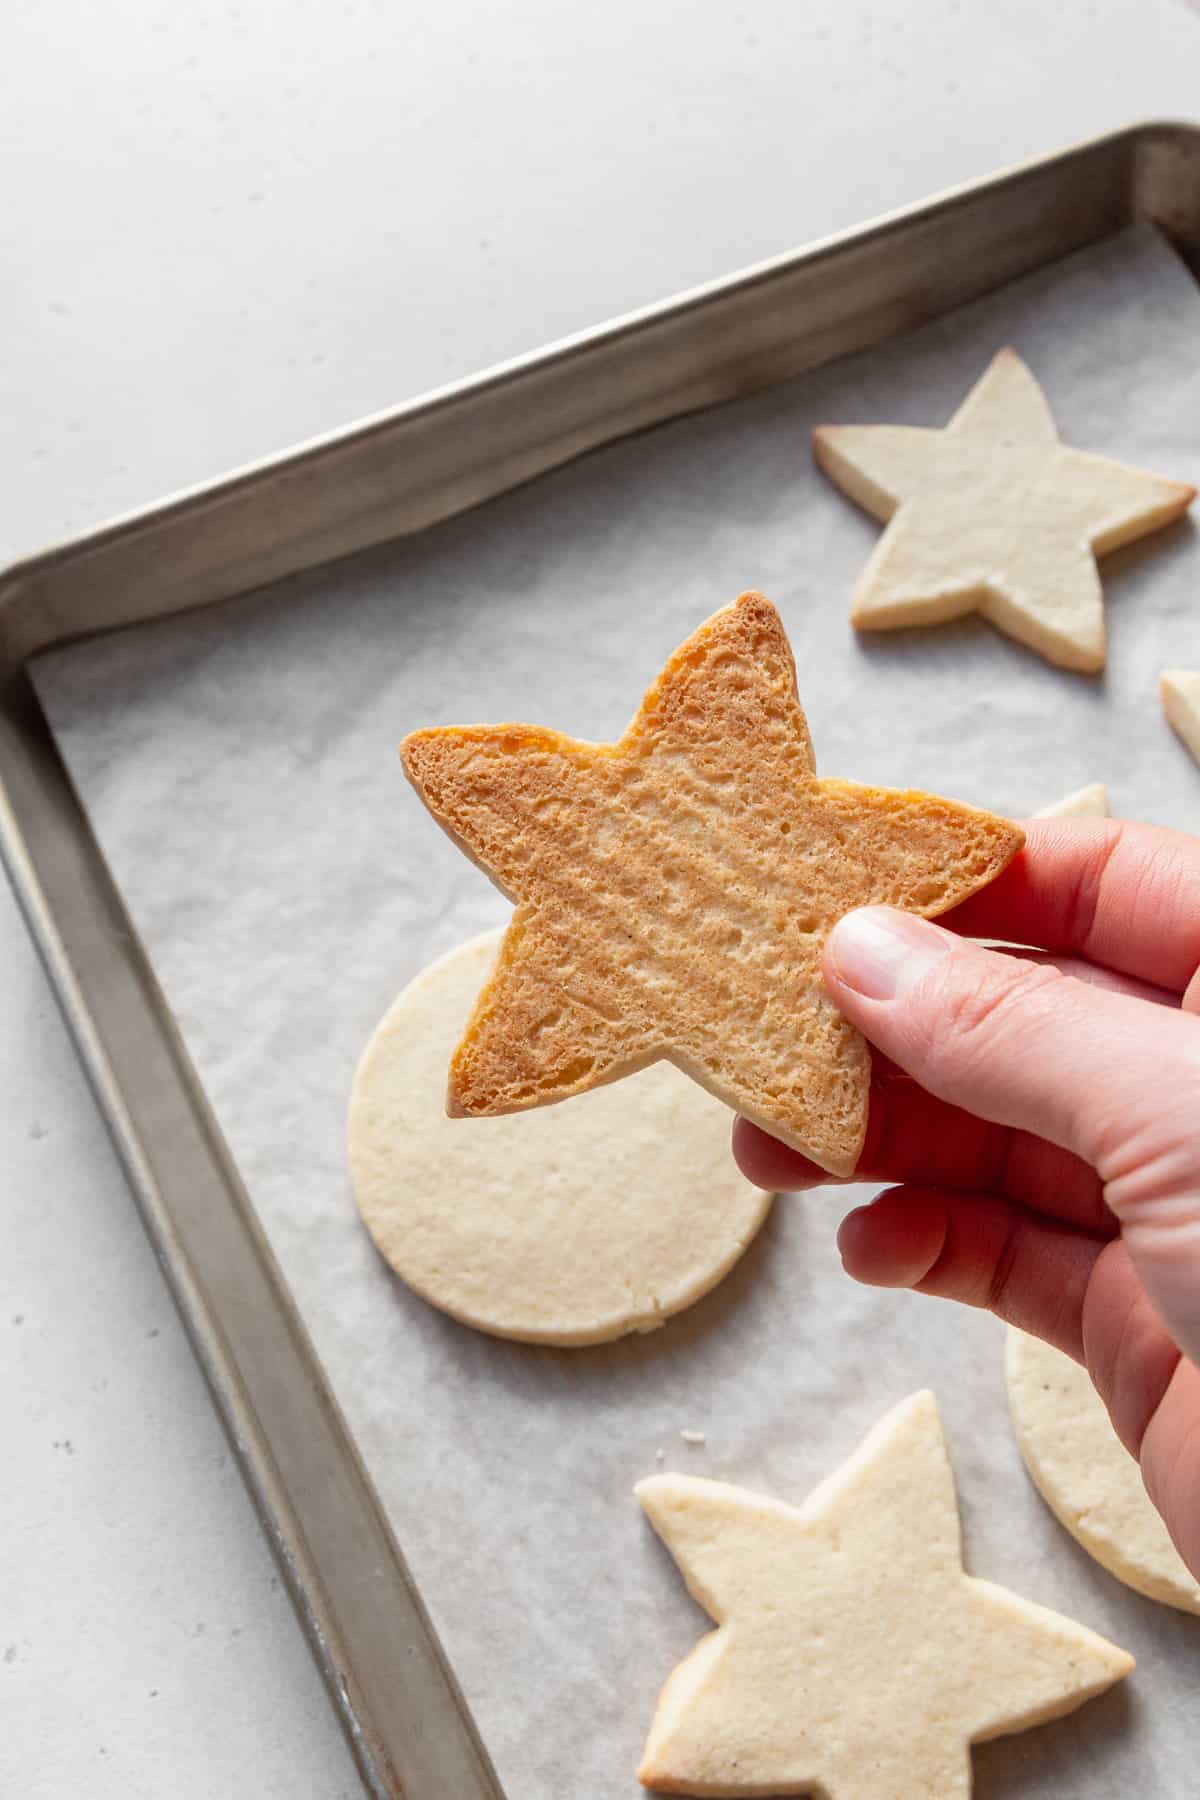 A hand holding a star-shaped sugar cookie, showing the golden color of the bottom of the cookie.